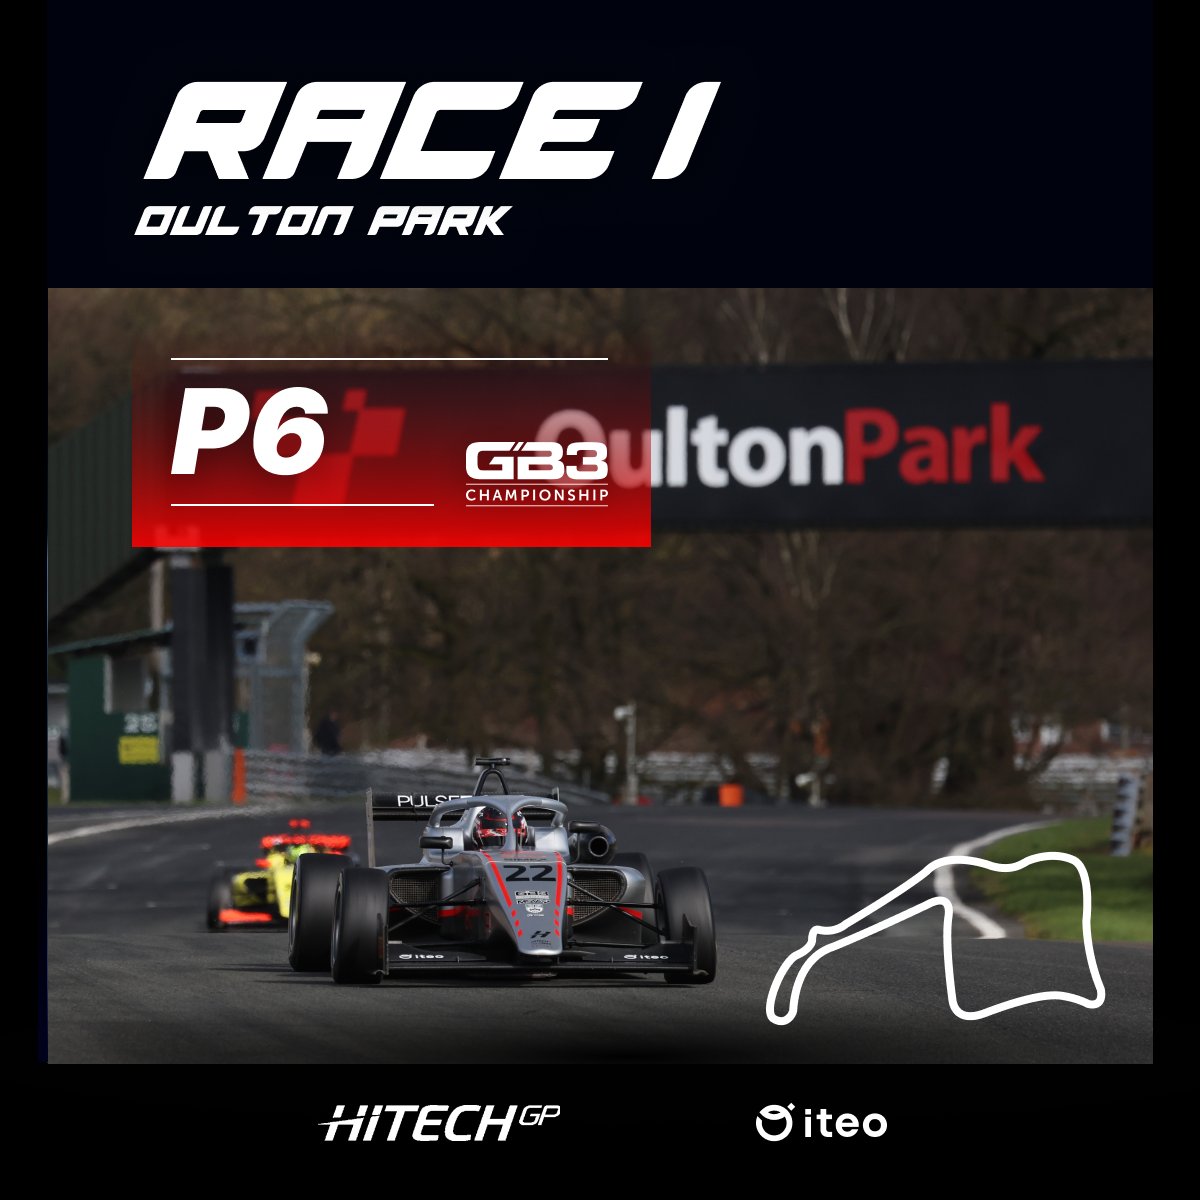 P6 in the opening race of the season and valuable points to the standings for Tymek. Tomorrow is day off so it will be time to celebrate Easter and draw conclusions before the further two races on Monday 👌 @iteo_apps @HitechGP @GB3Championship #GB3 #viaF1